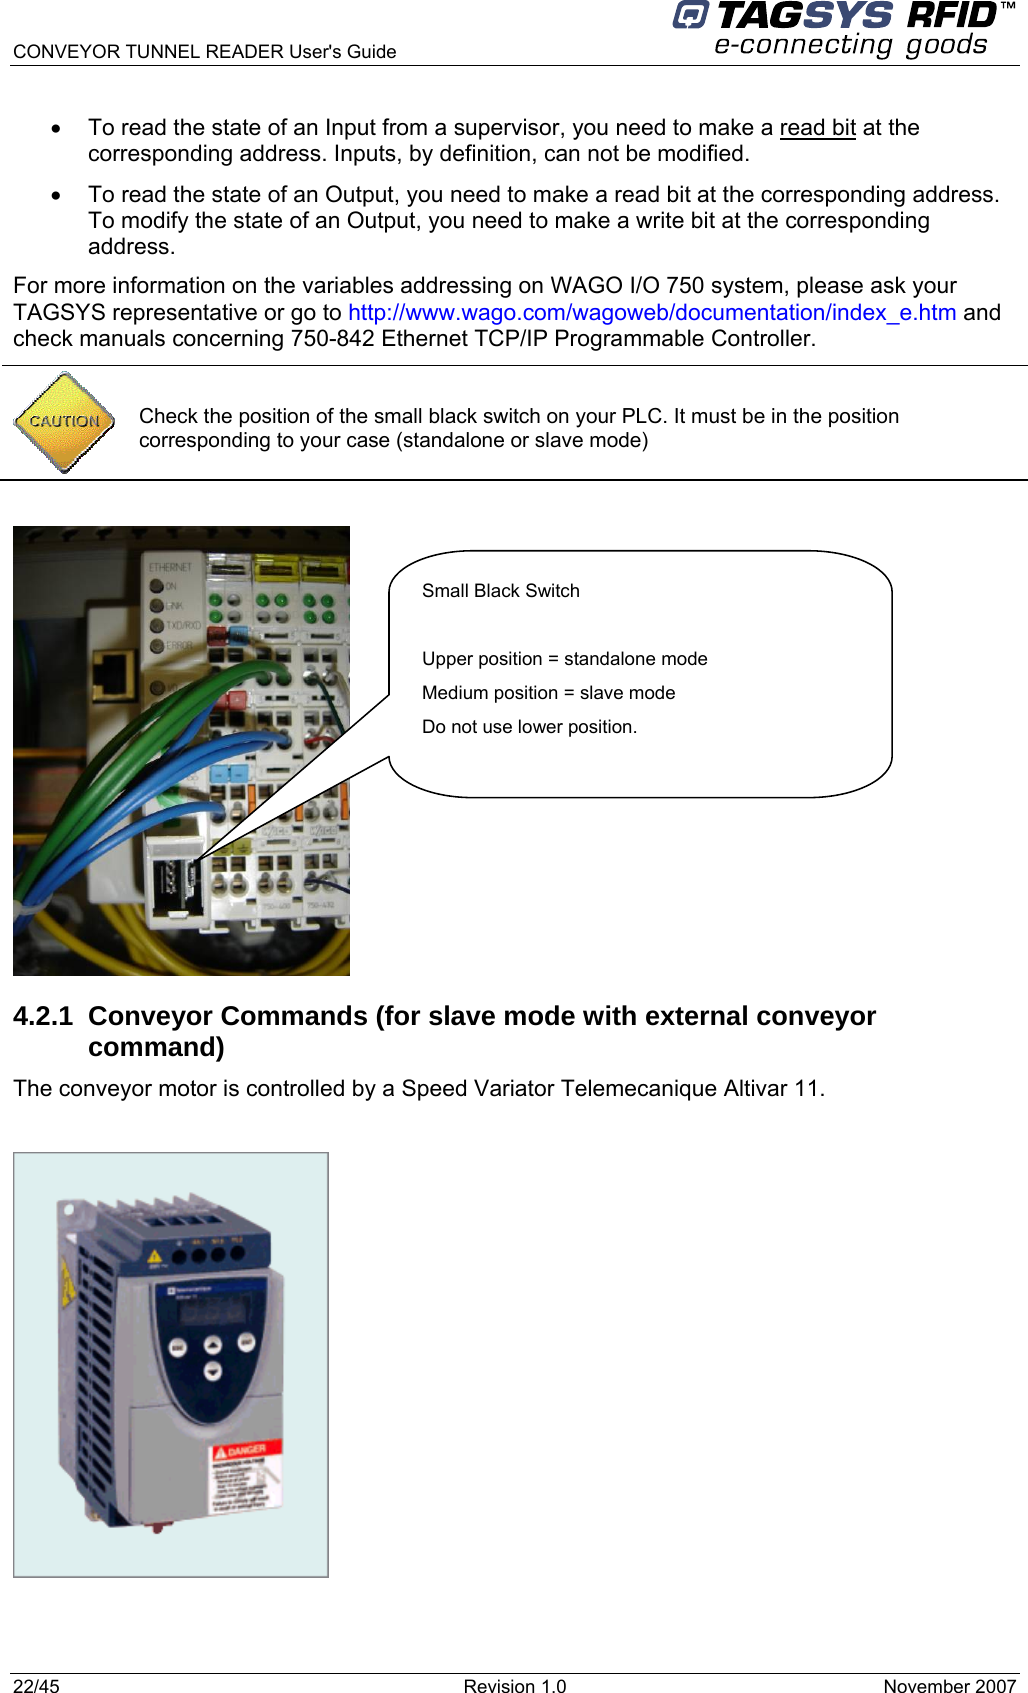  CONVEYOR TUNNEL READER User&apos;s Guide 22/45  Revision 1.0  November 2007  •  To read the state of an Input from a supervisor, you need to make a read bit at the corresponding address. Inputs, by definition, can not be modified. •  To read the state of an Output, you need to make a read bit at the corresponding address. To modify the state of an Output, you need to make a write bit at the corresponding address. For more information on the variables addressing on WAGO I/O 750 system, please ask your TAGSYS representative or go to http://www.wago.com/wagoweb/documentation/index_e.htm and check manuals concerning 750-842 Ethernet TCP/IP Programmable Controller.   4.2.1  Conveyor Commands (for slave mode with external conveyor command) The conveyor motor is controlled by a Speed Variator Telemecanique Altivar 11.     Check the position of the small black switch on your PLC. It must be in the position corresponding to your case (standalone or slave mode) Small Black Switch  Upper position = standalone mode Medium position = slave mode Do not use lower position.  